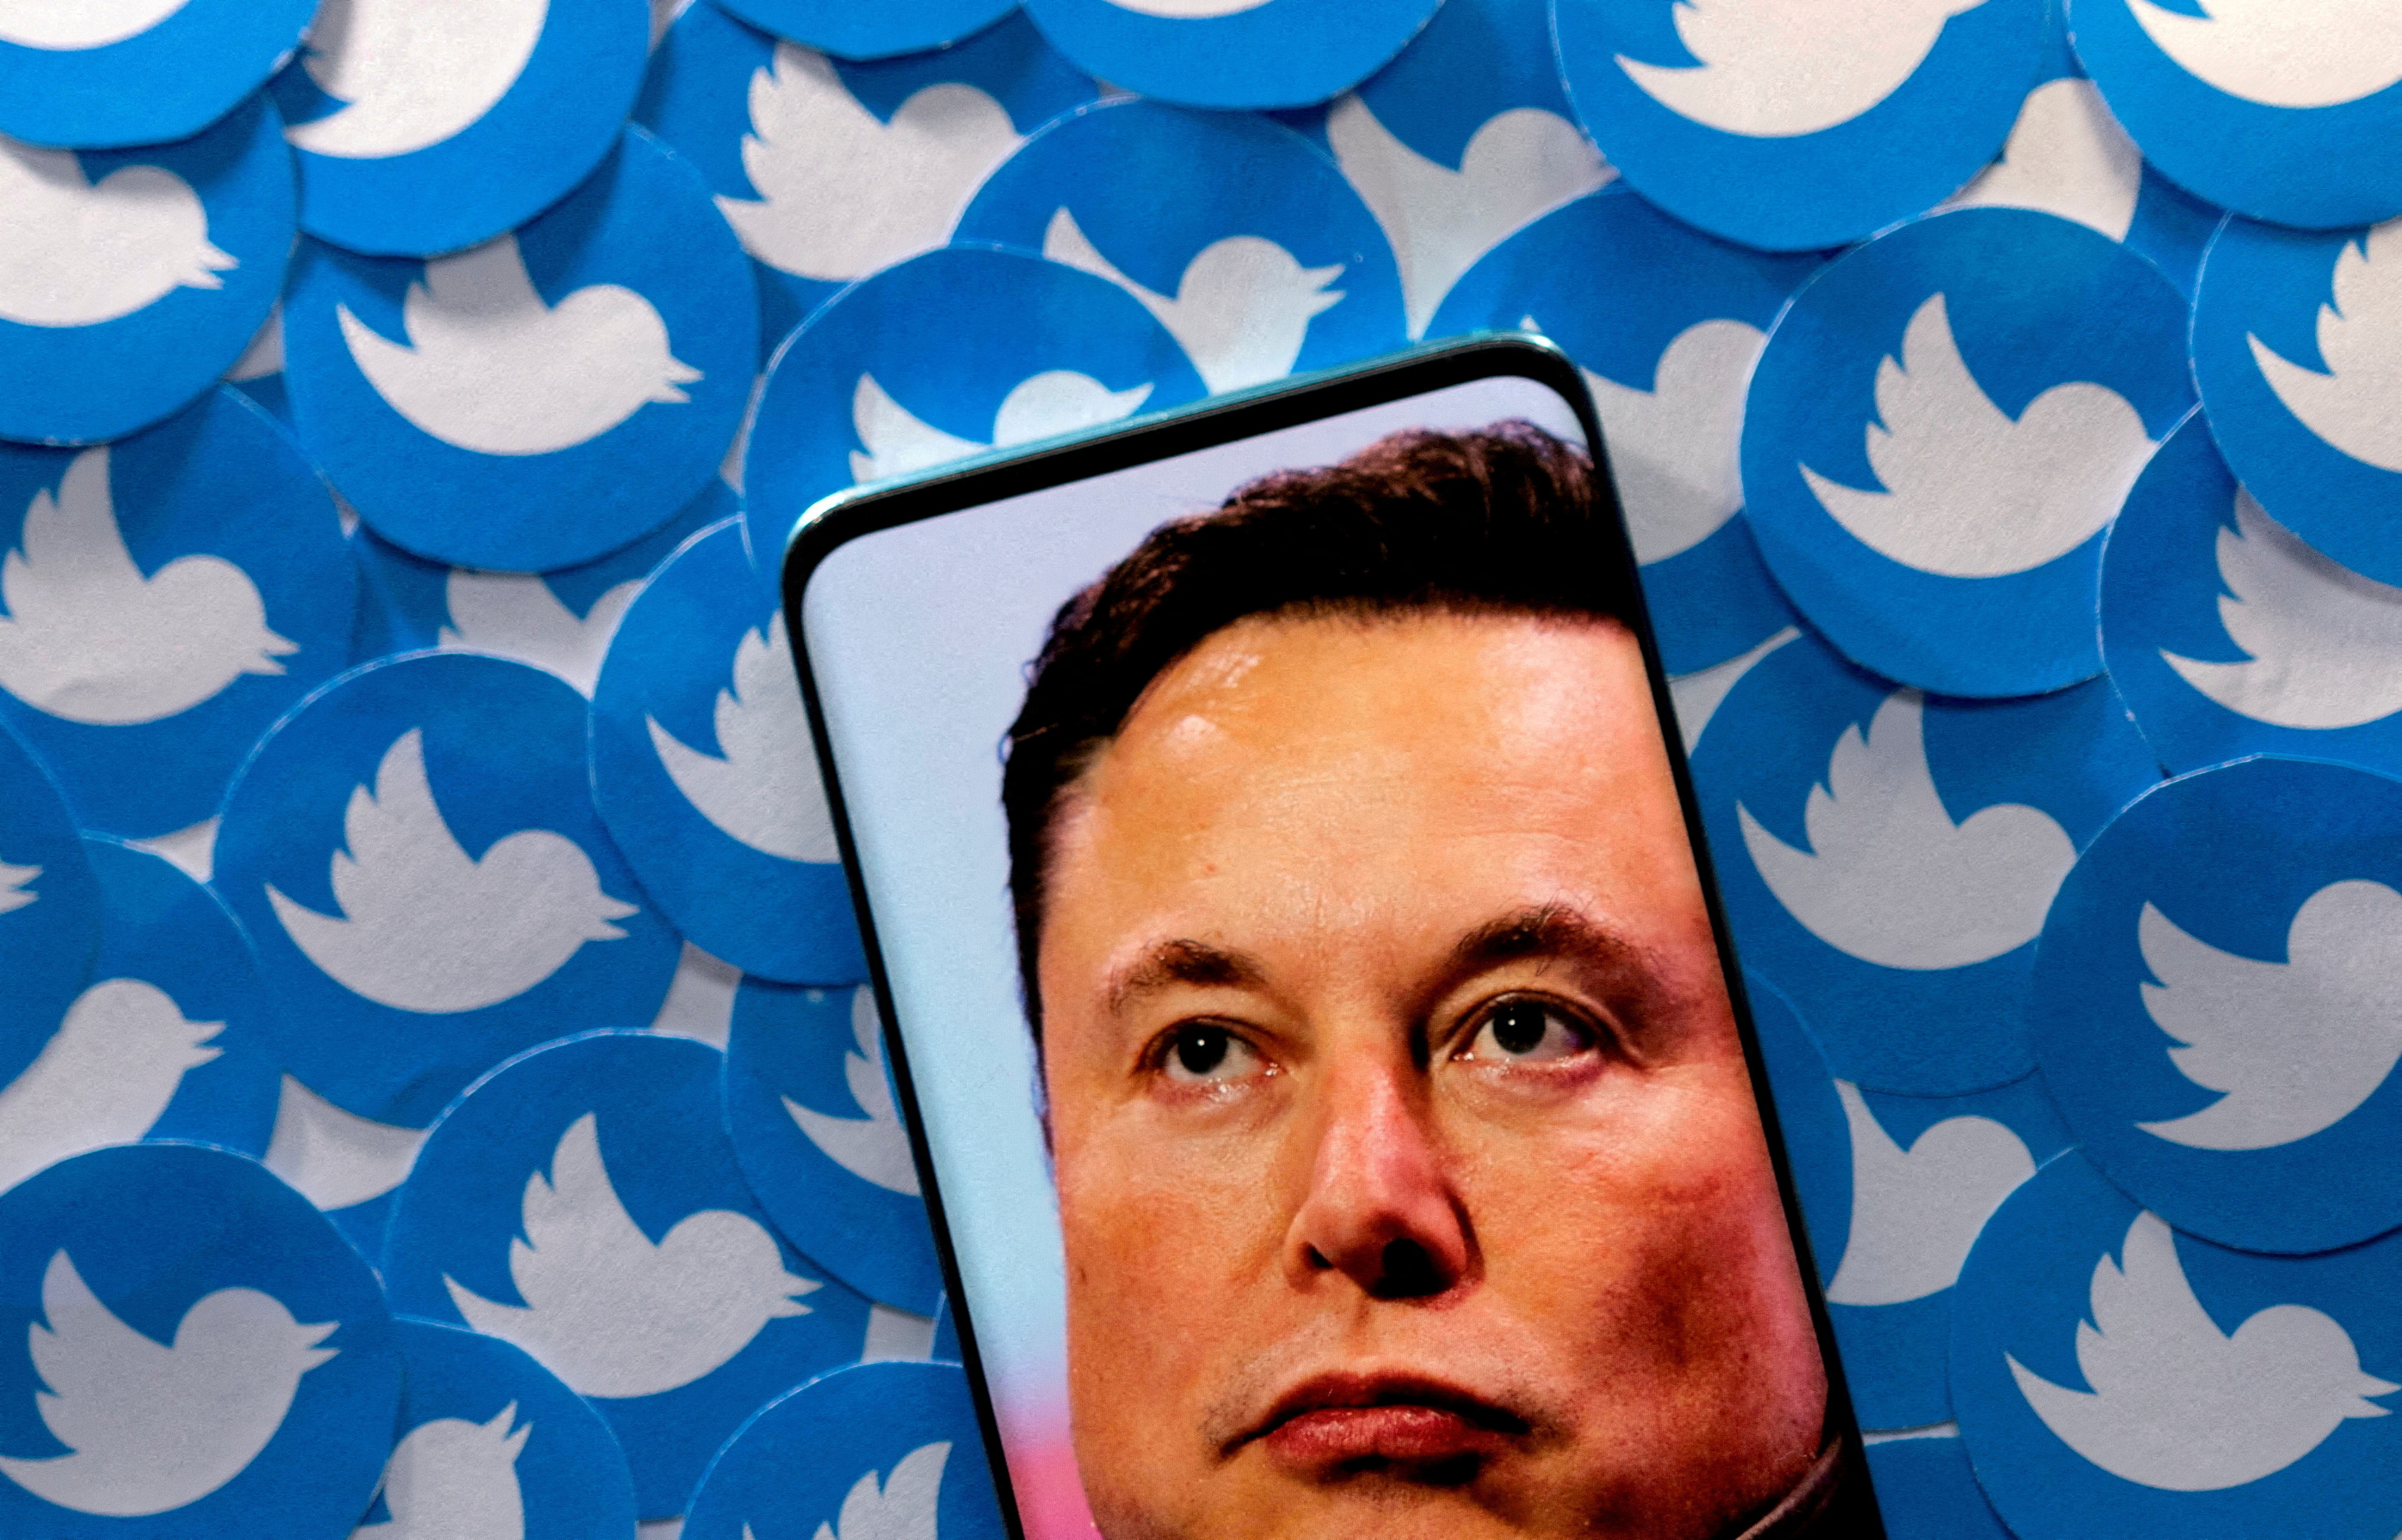 s Elon Musk image on smartphone and printed Twitter logos